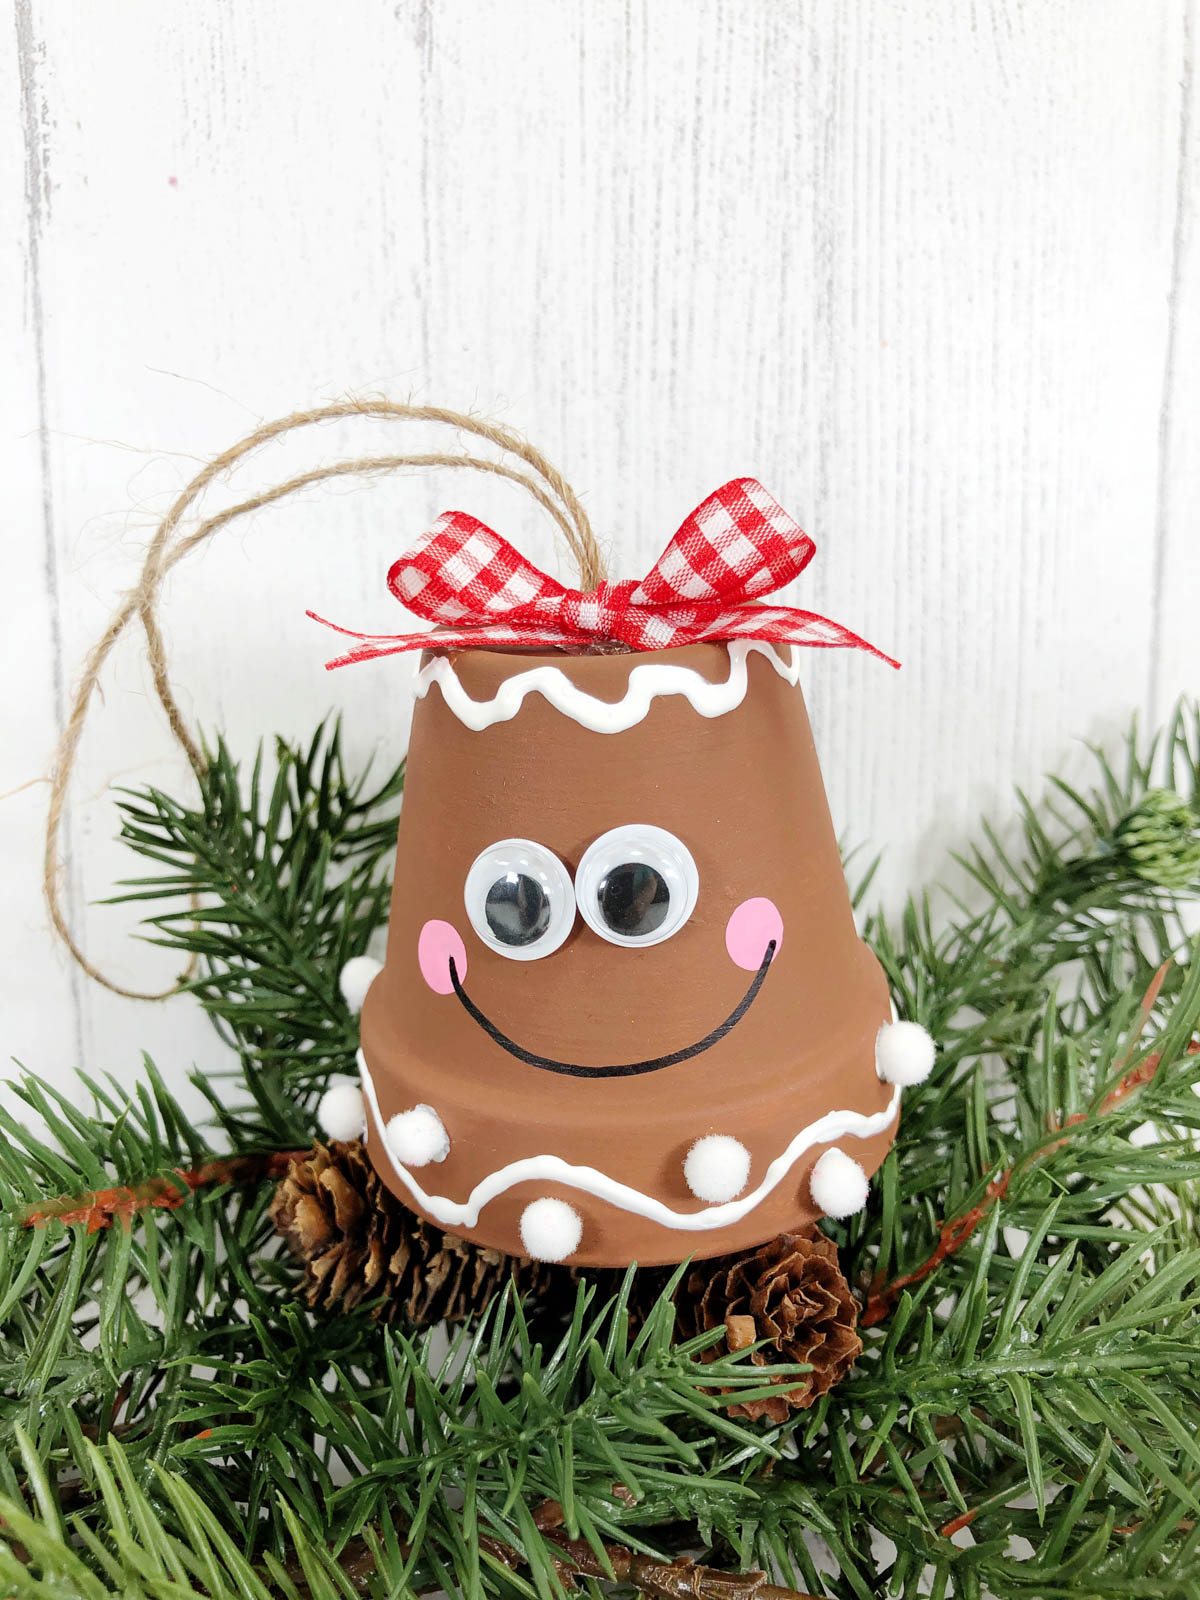 A gingerbread ornament with a smiley face on it.